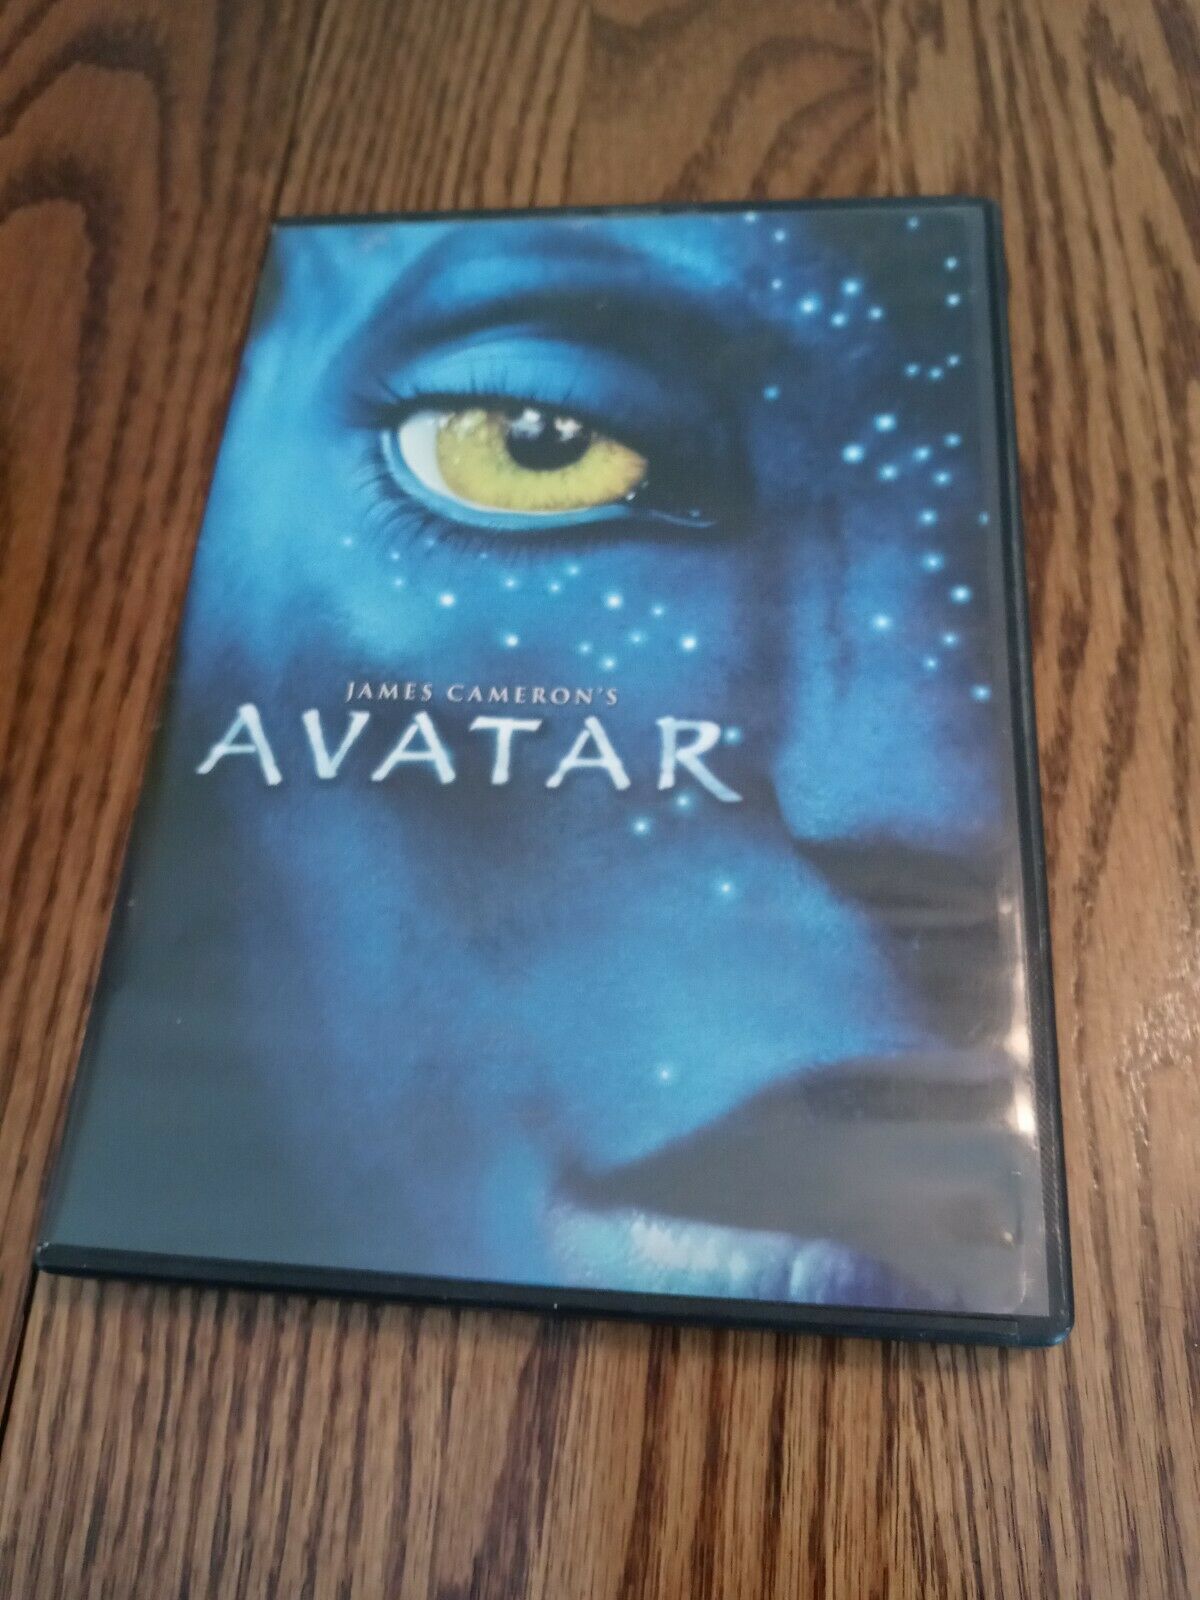 Primary image for Avatar (DVD, 2009)